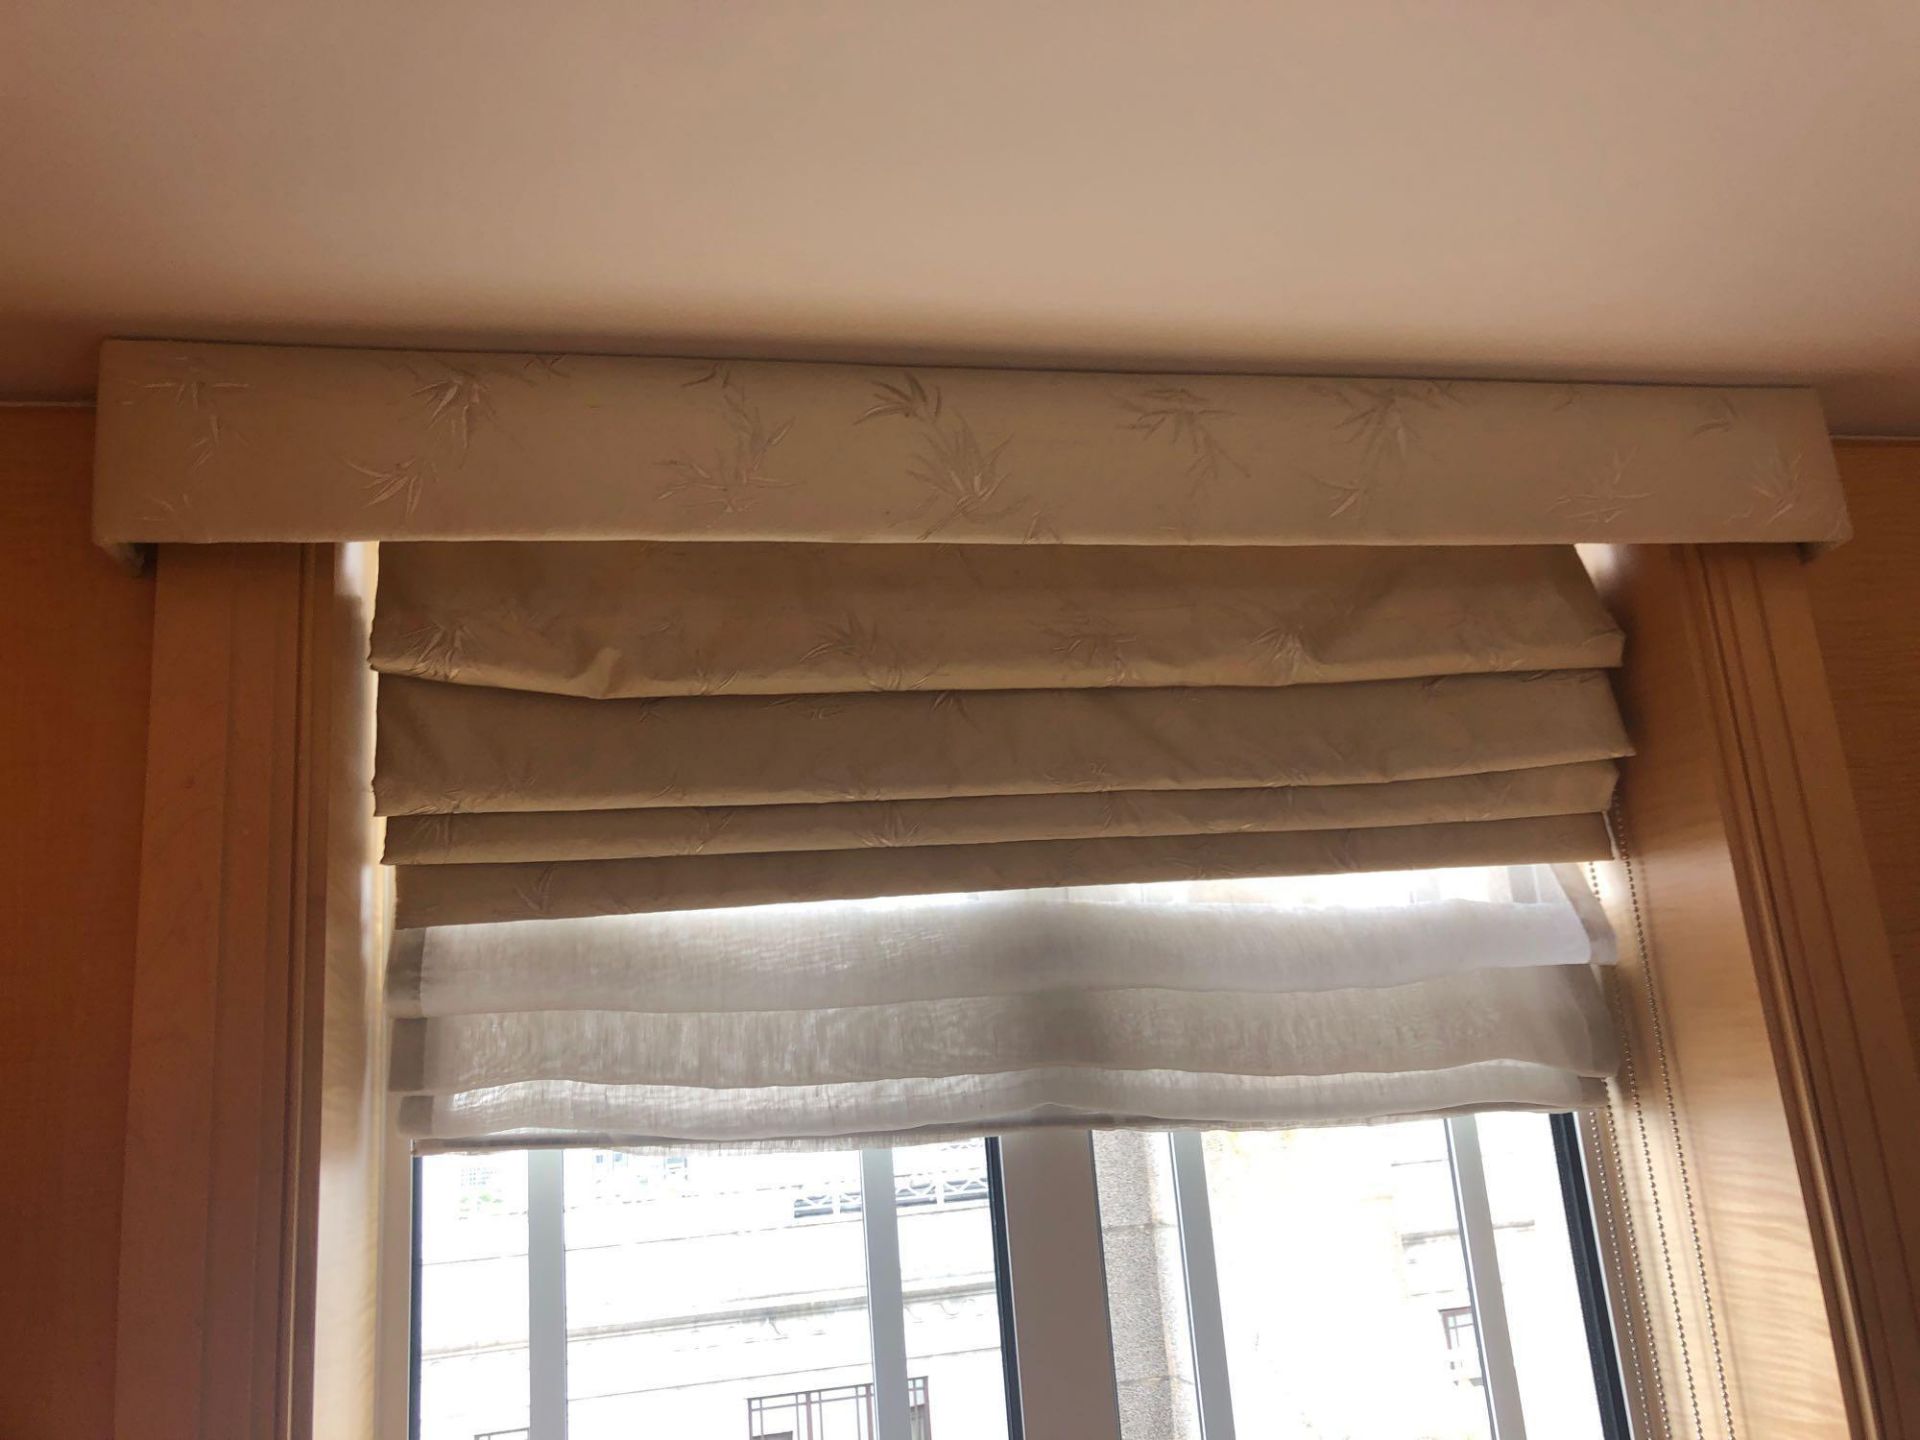 Cream Silk Roman Blind With Leaf Pattern And Small Pelmet 96 x 130cm (The Audley )